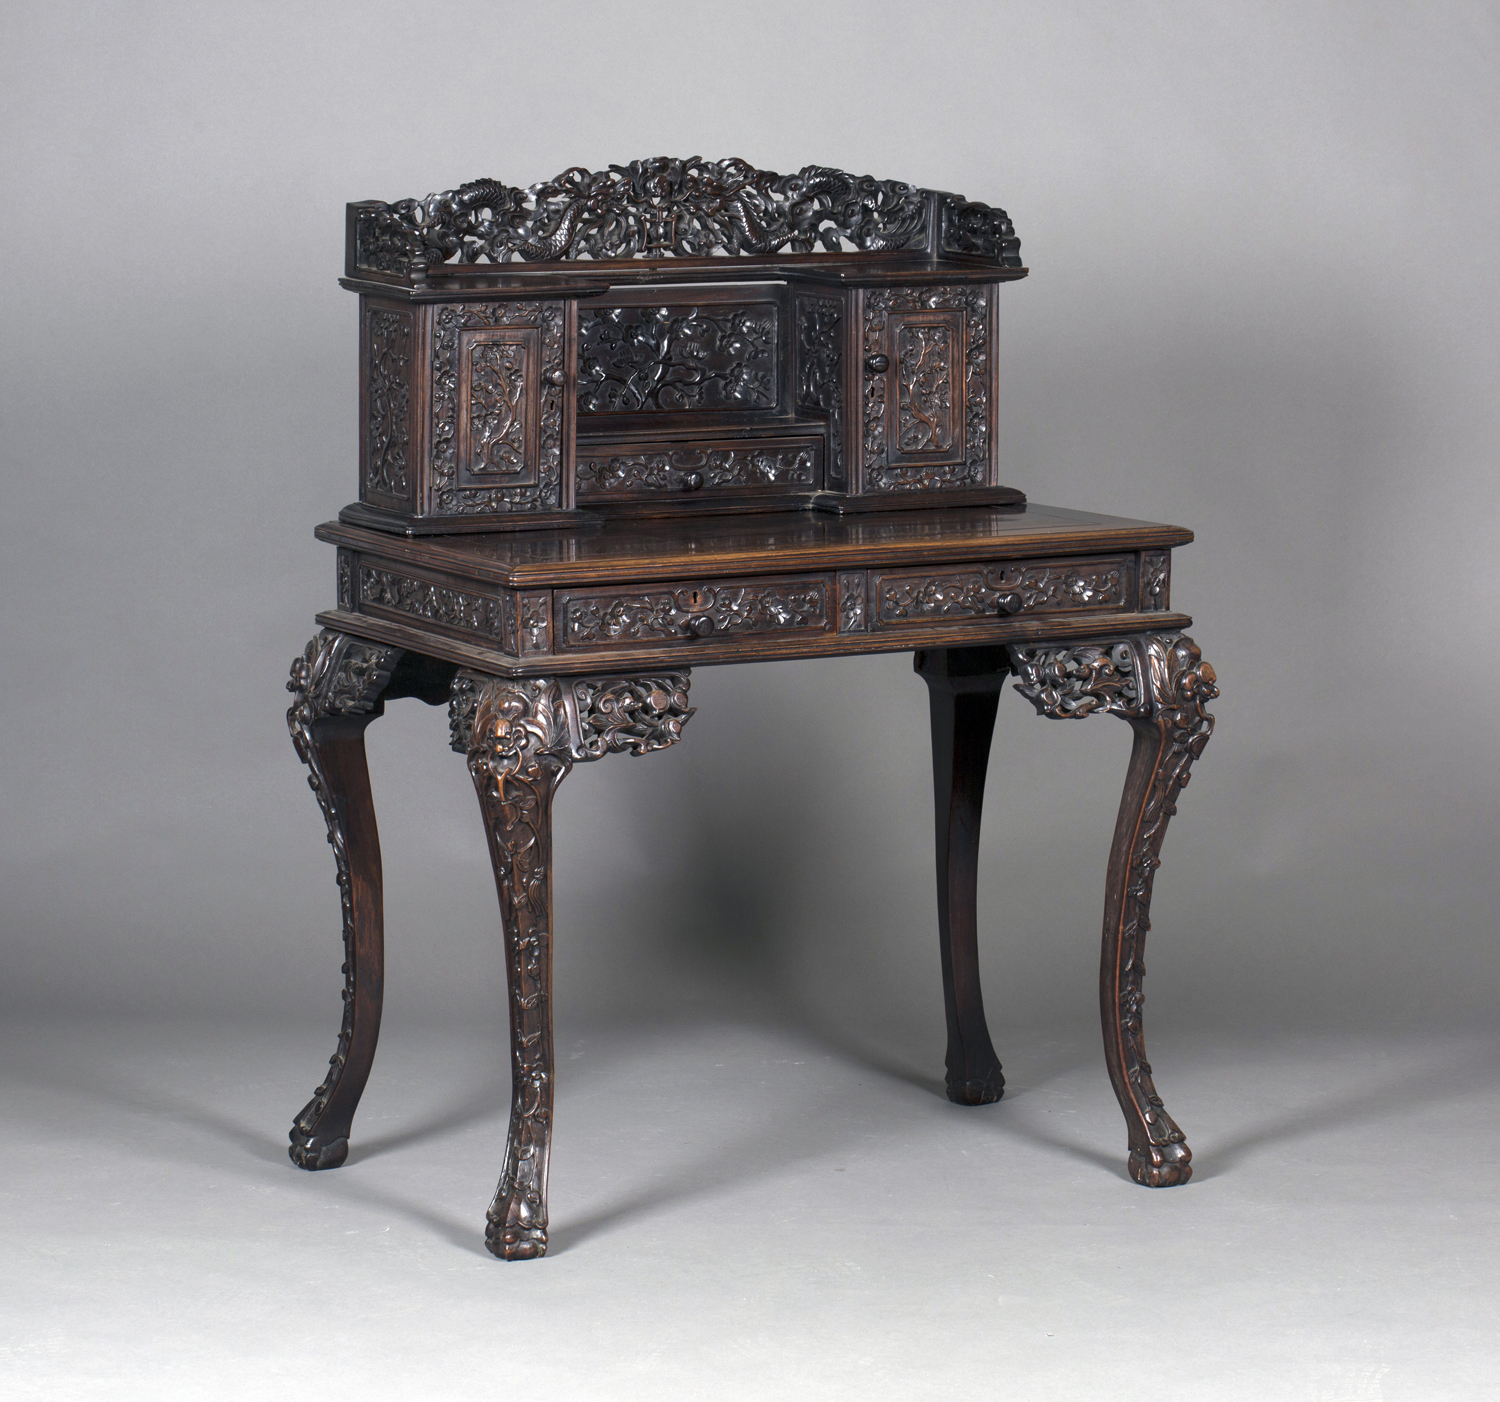 A Chinese hardwood writing desk with carved blossoming prunus decoration, late 19th century, the